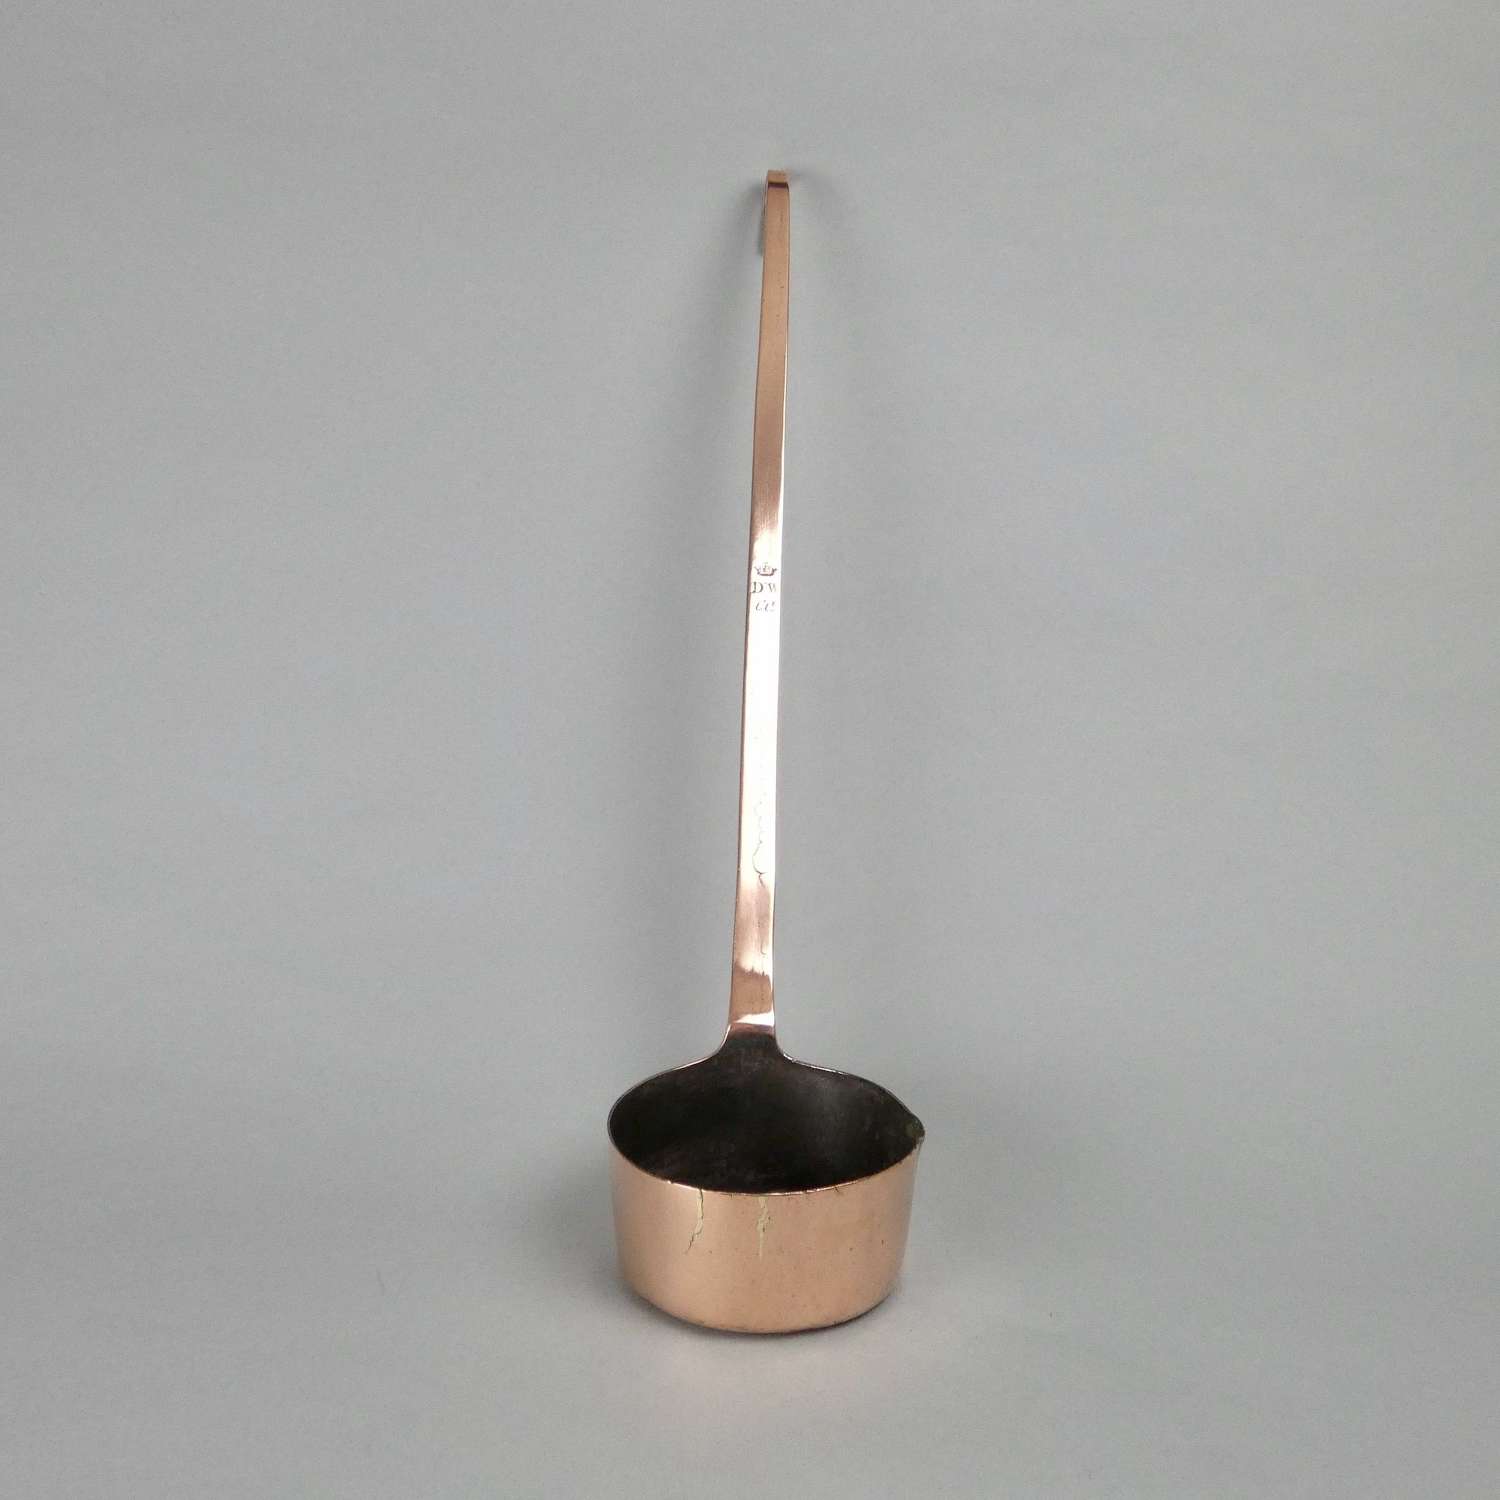 Copper ladle with engraved crest